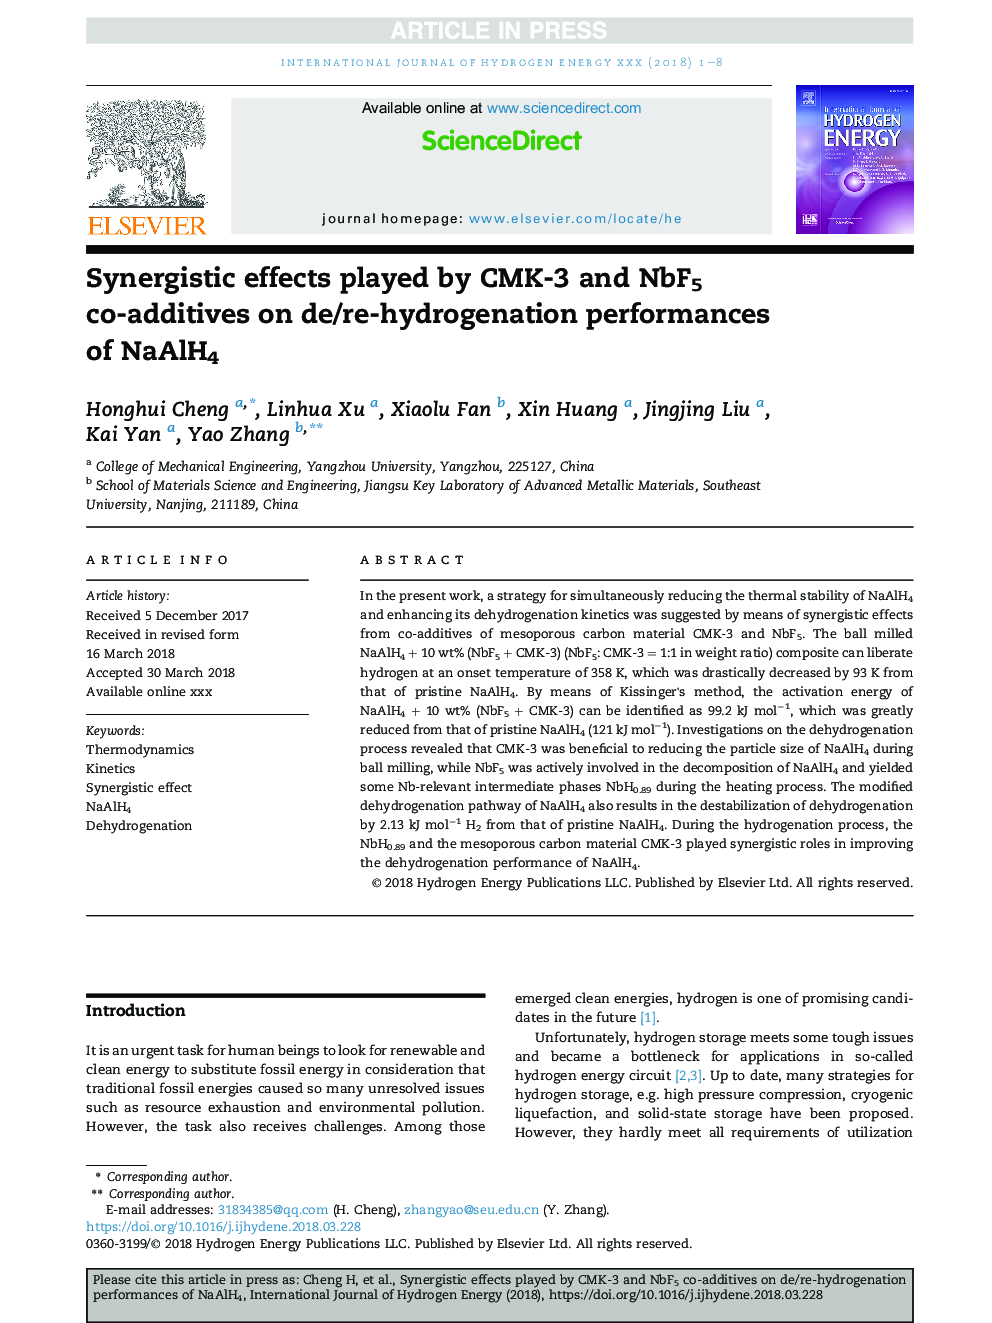 Synergistic effects played by CMK-3 and NbF5 co-additives on de/re-hydrogenation performances of NaAlH4